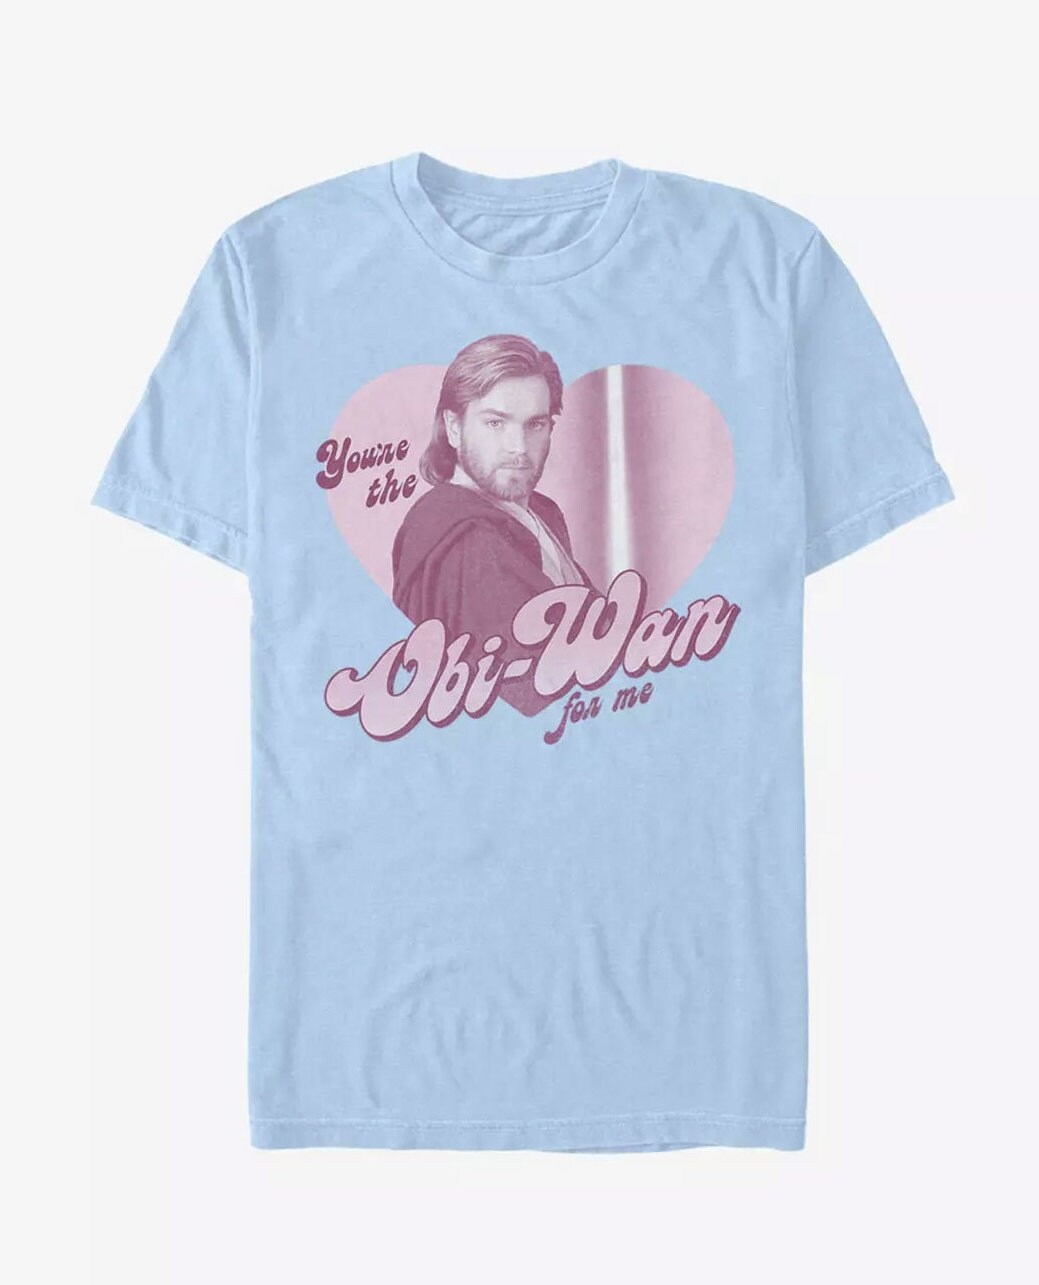 “You’re the Obi-Wan For Me” T-shirt by Hot Topic